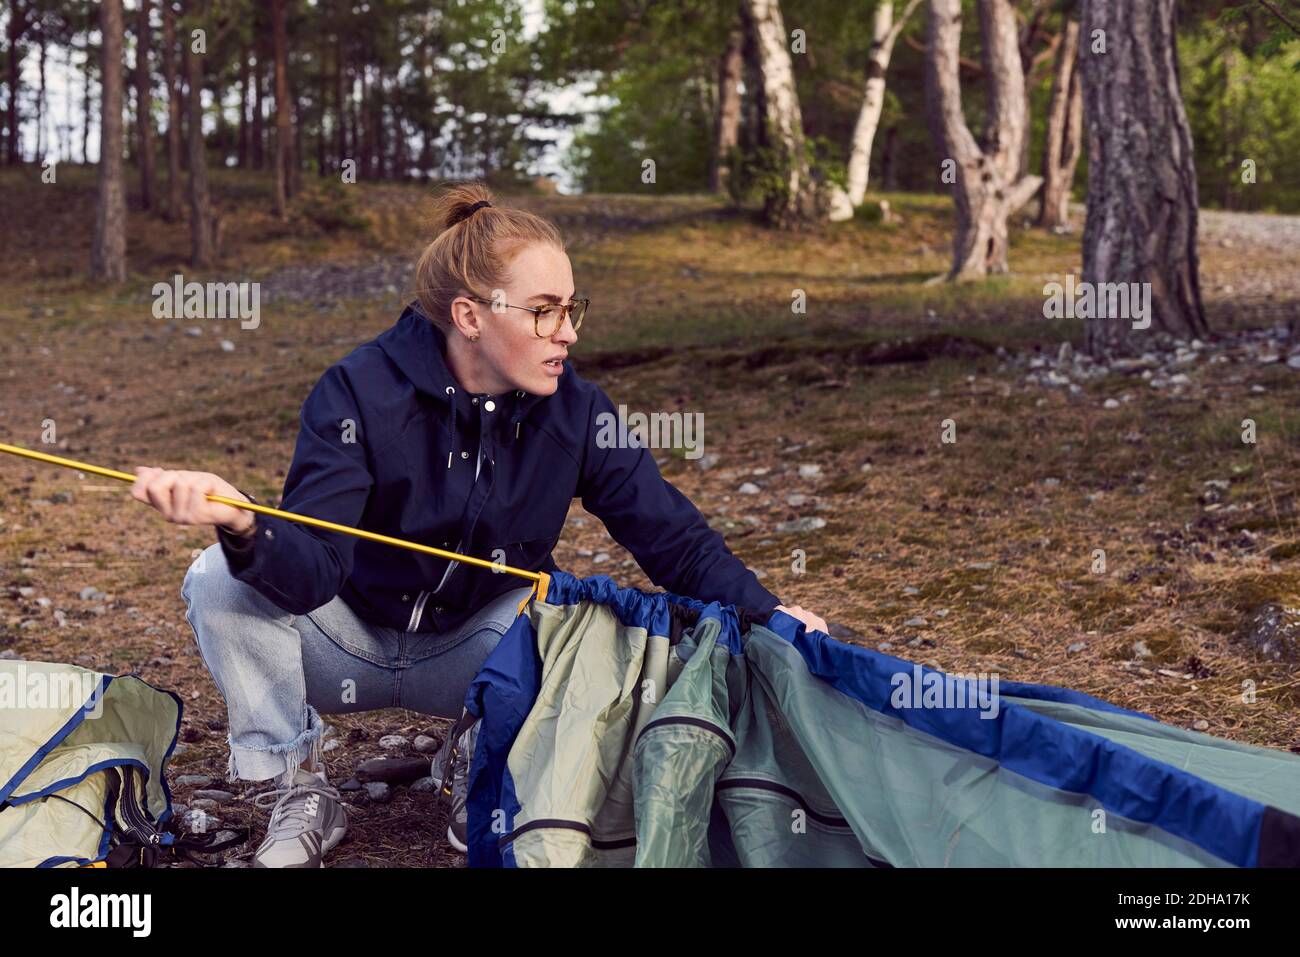 Young woman crouching while setting up tent against trees at campsite Stock Photo